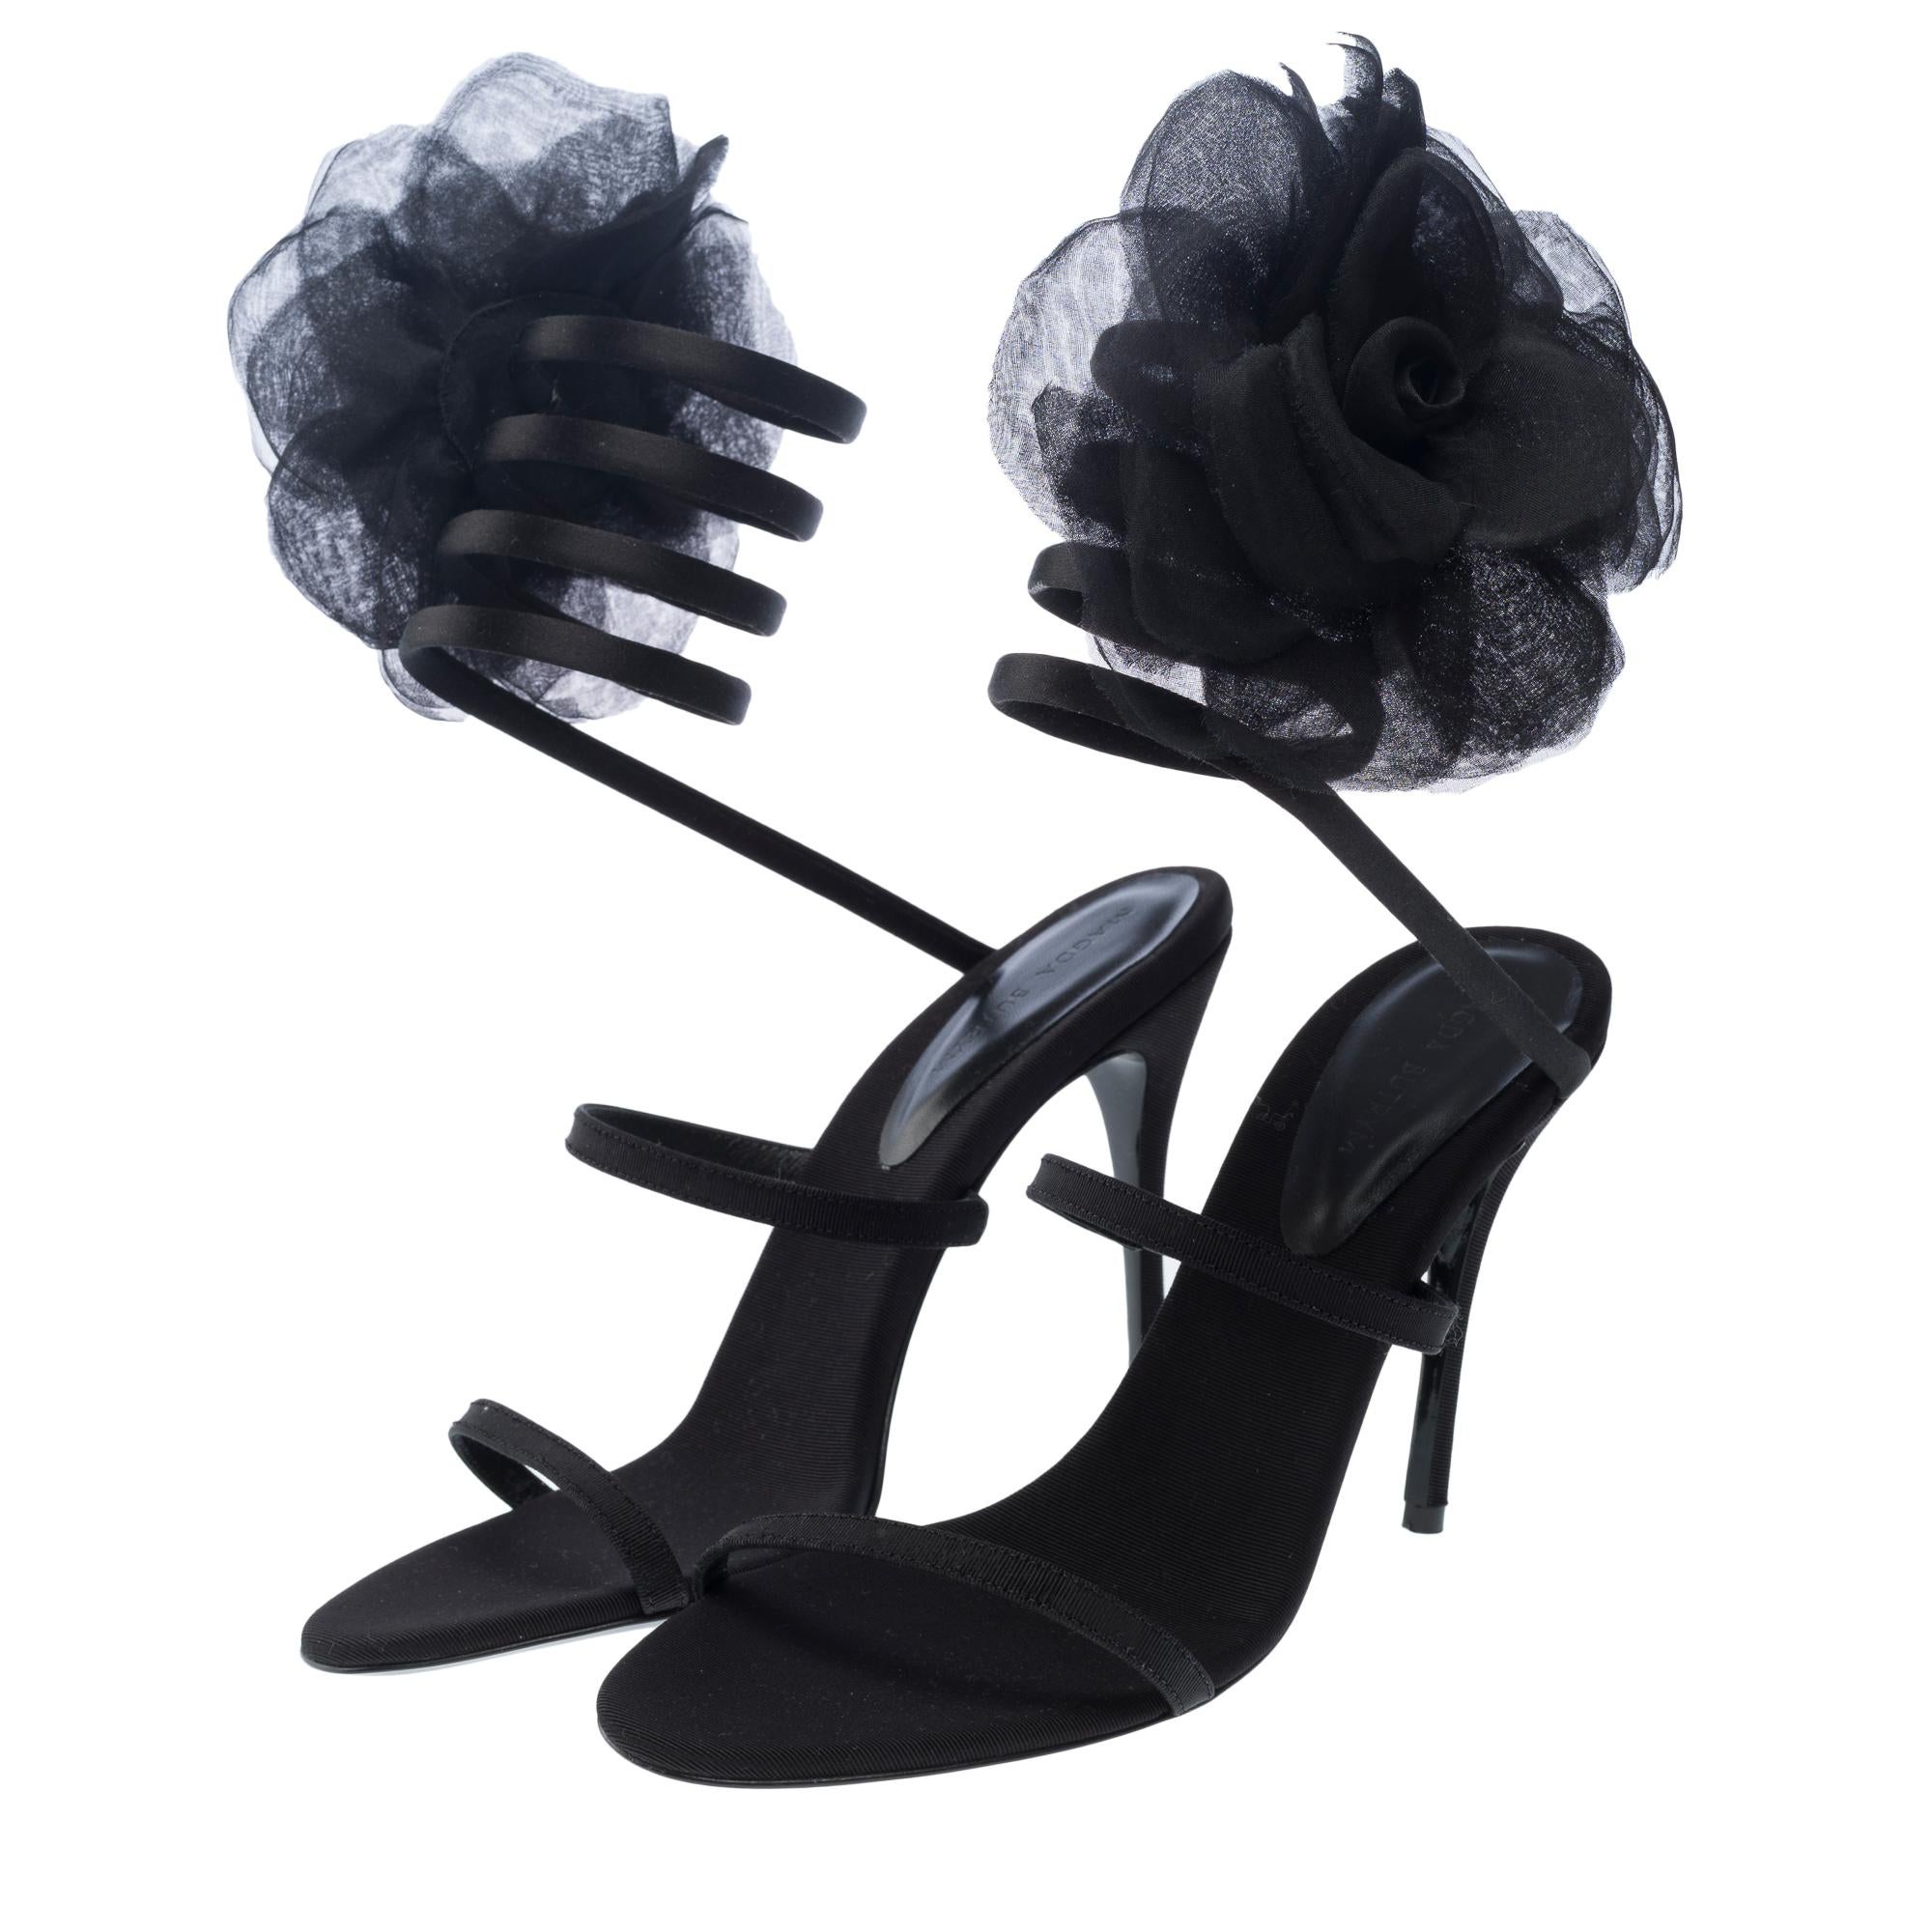 New Magda Butrym Peep Toe Mules in black satin , Size 39 In New Condition For Sale In Paris, IDF